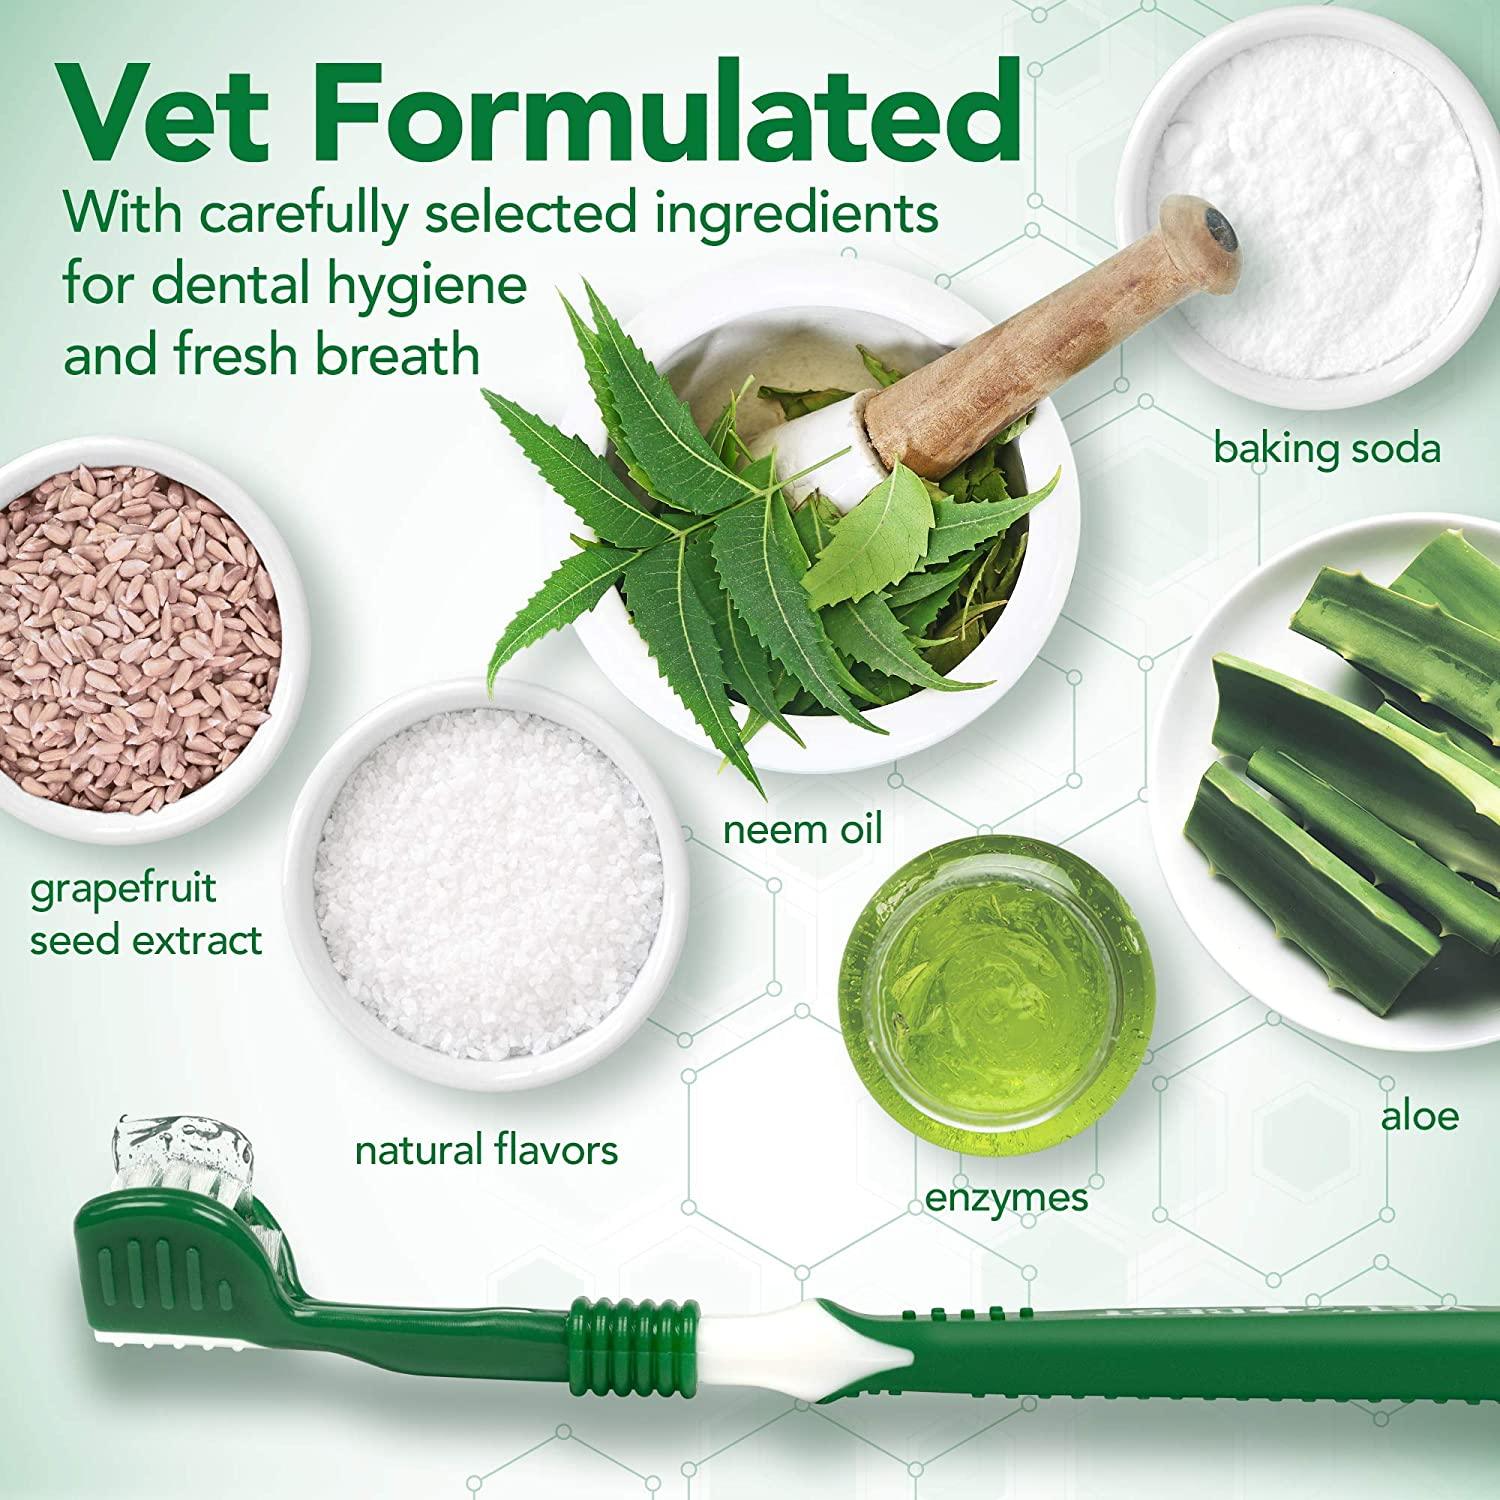 Baking Soda, Aloe, Enzymes, Natural Flavors, Grapefruit Seed Extract, Natural Flavors, Neem Oil and Dog Toothbrush